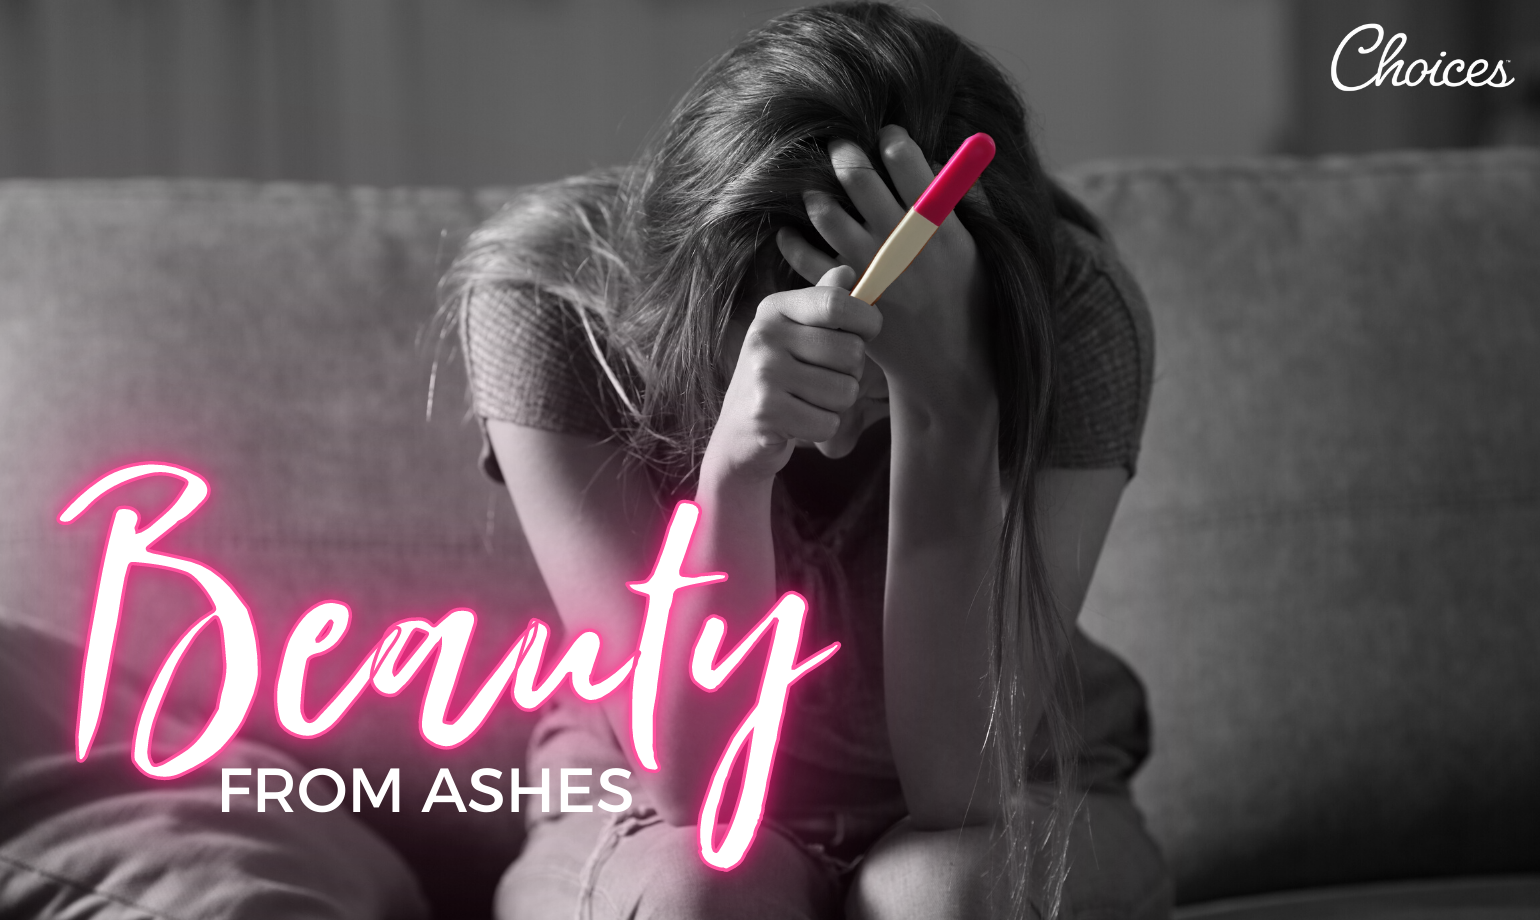 Beauty from Ashes: The Kristin Shirley Story